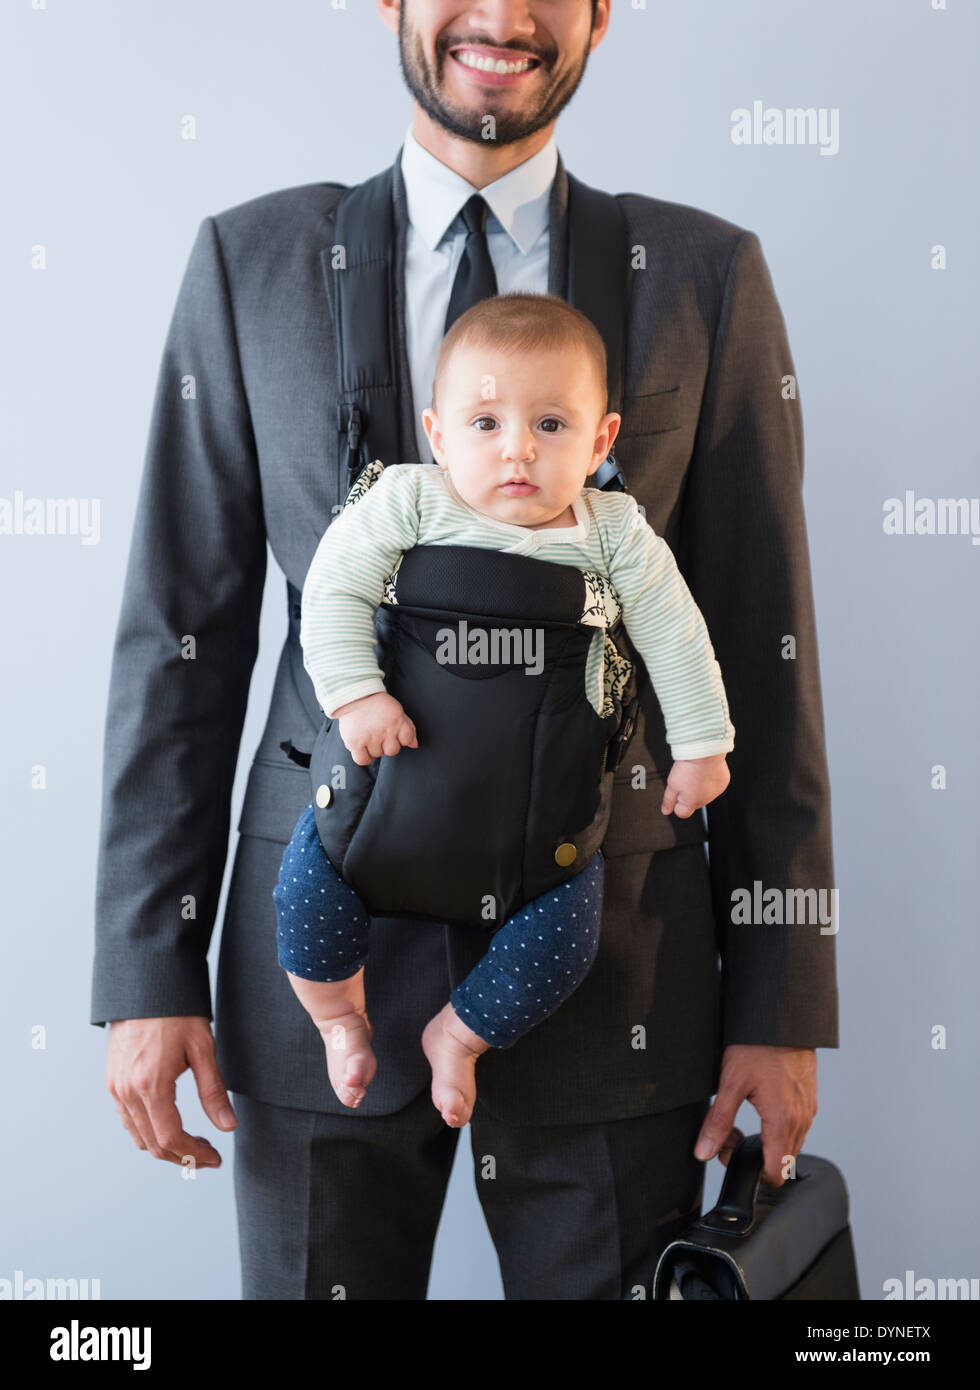 Businessman carrying baby in carrier Stock Photo